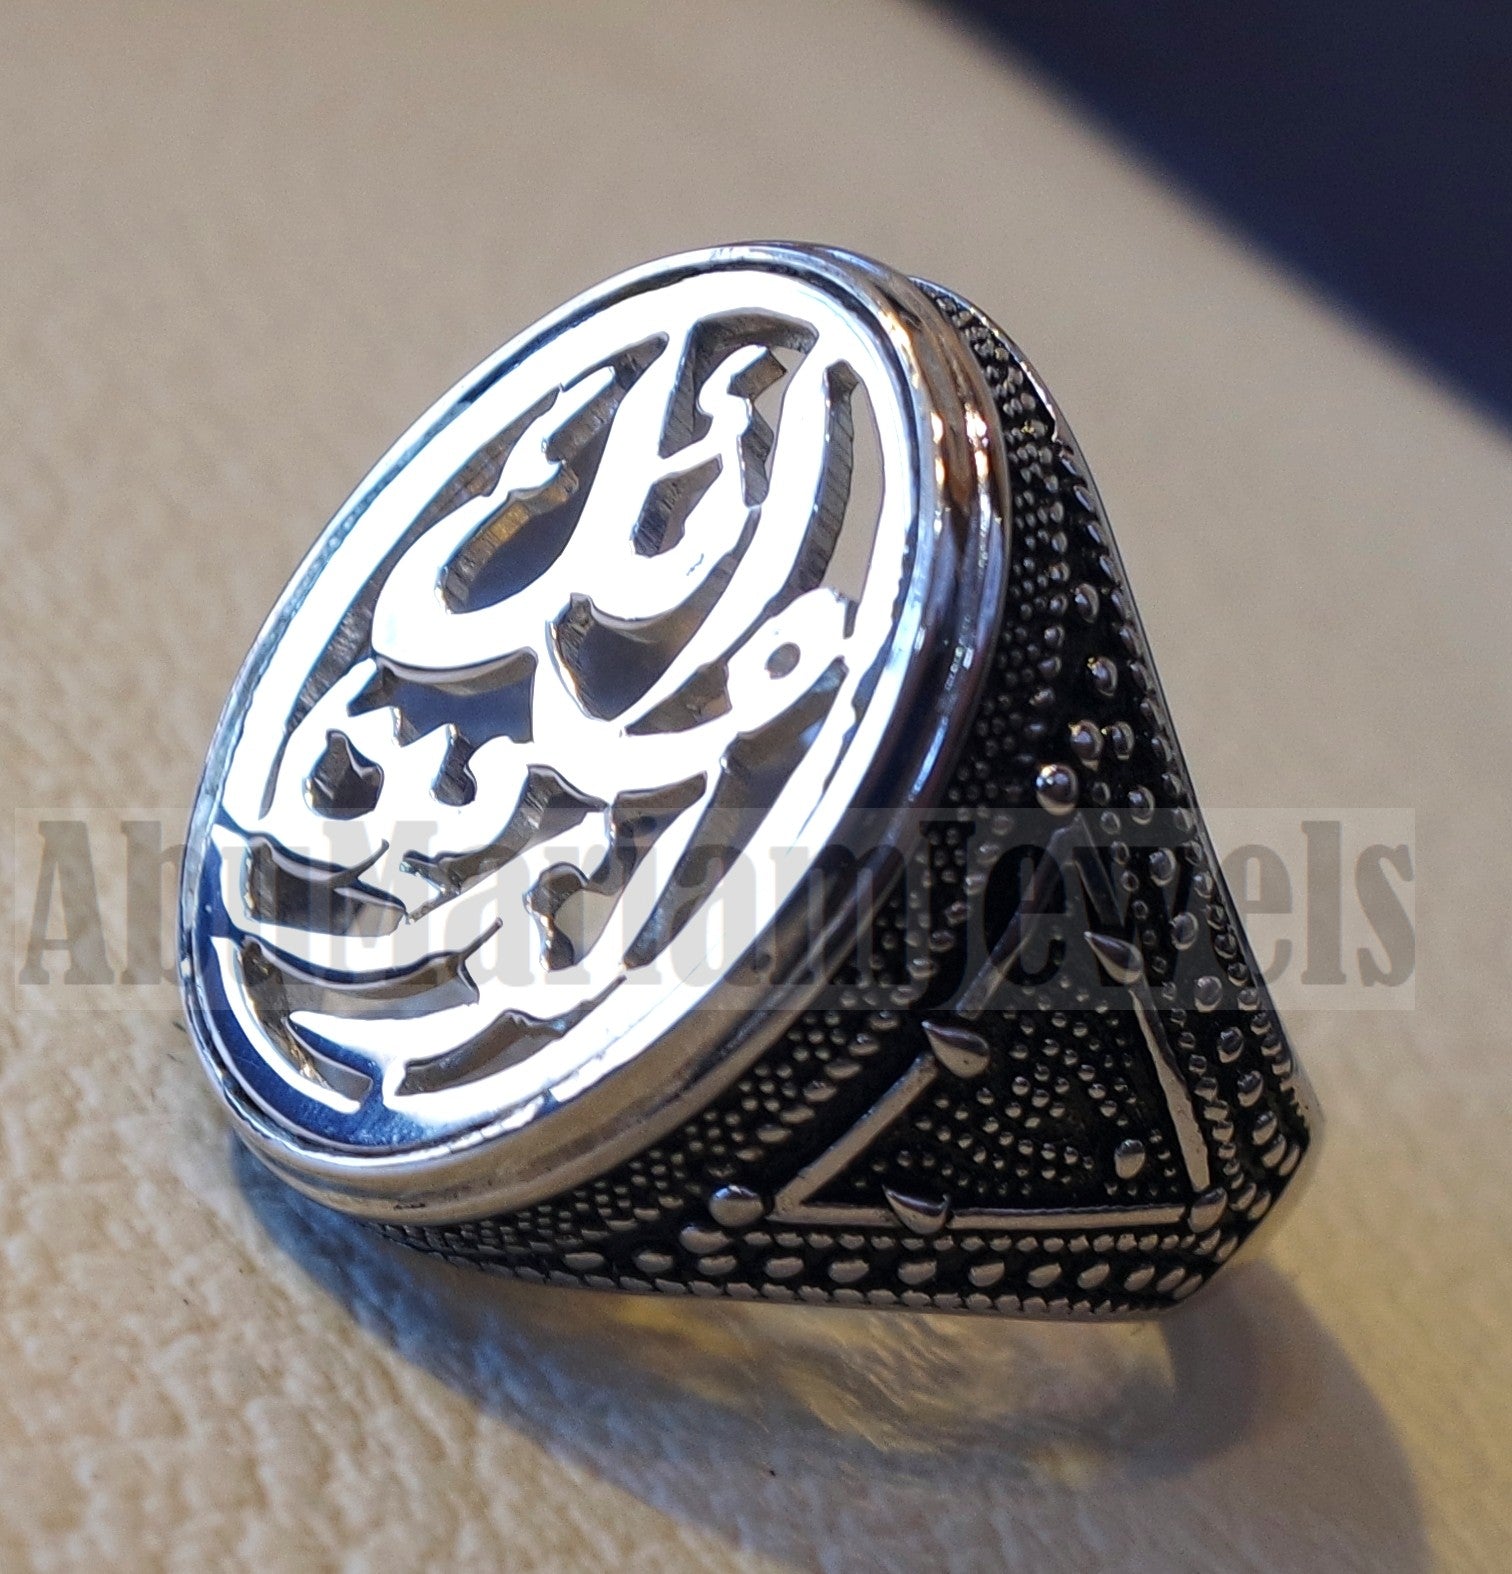 Customized Arabic calligraphy names handmade ring personalized antique jewelry style sterling silver 925 any size TSN1007 خاتم اسم تفصيل